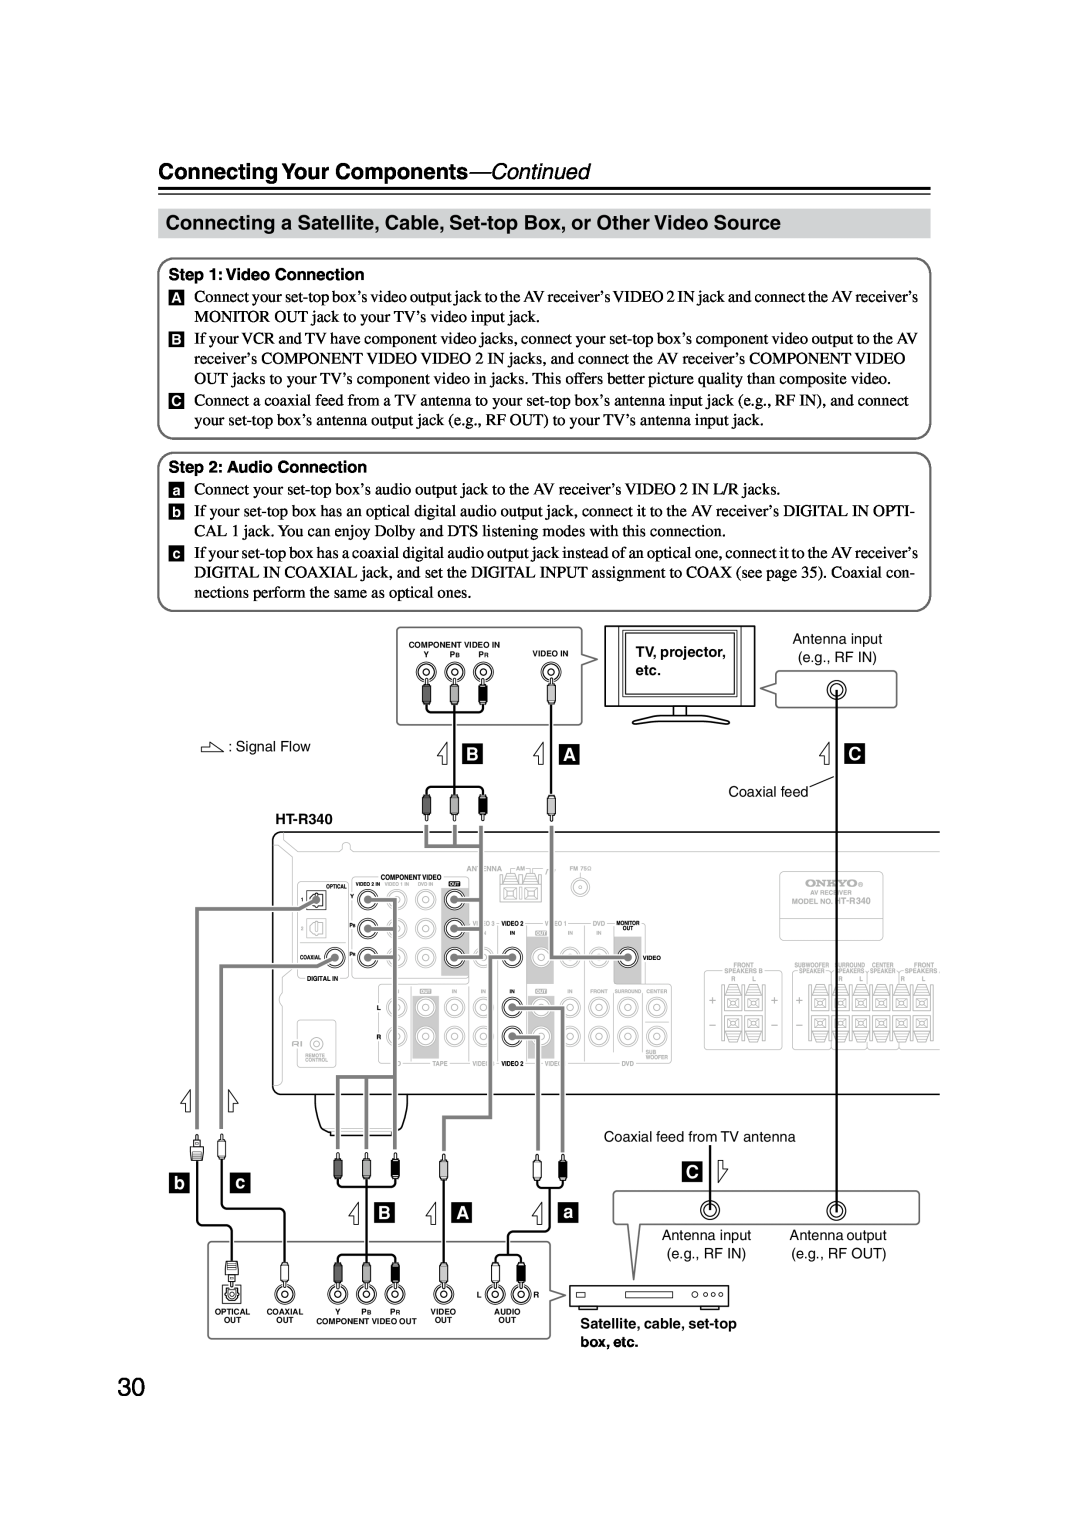 Onkyo HT-S590 instruction manual Connecting Your Components-Continued, e.g., RF IN, Satellite, cable, set-topbox, etc 